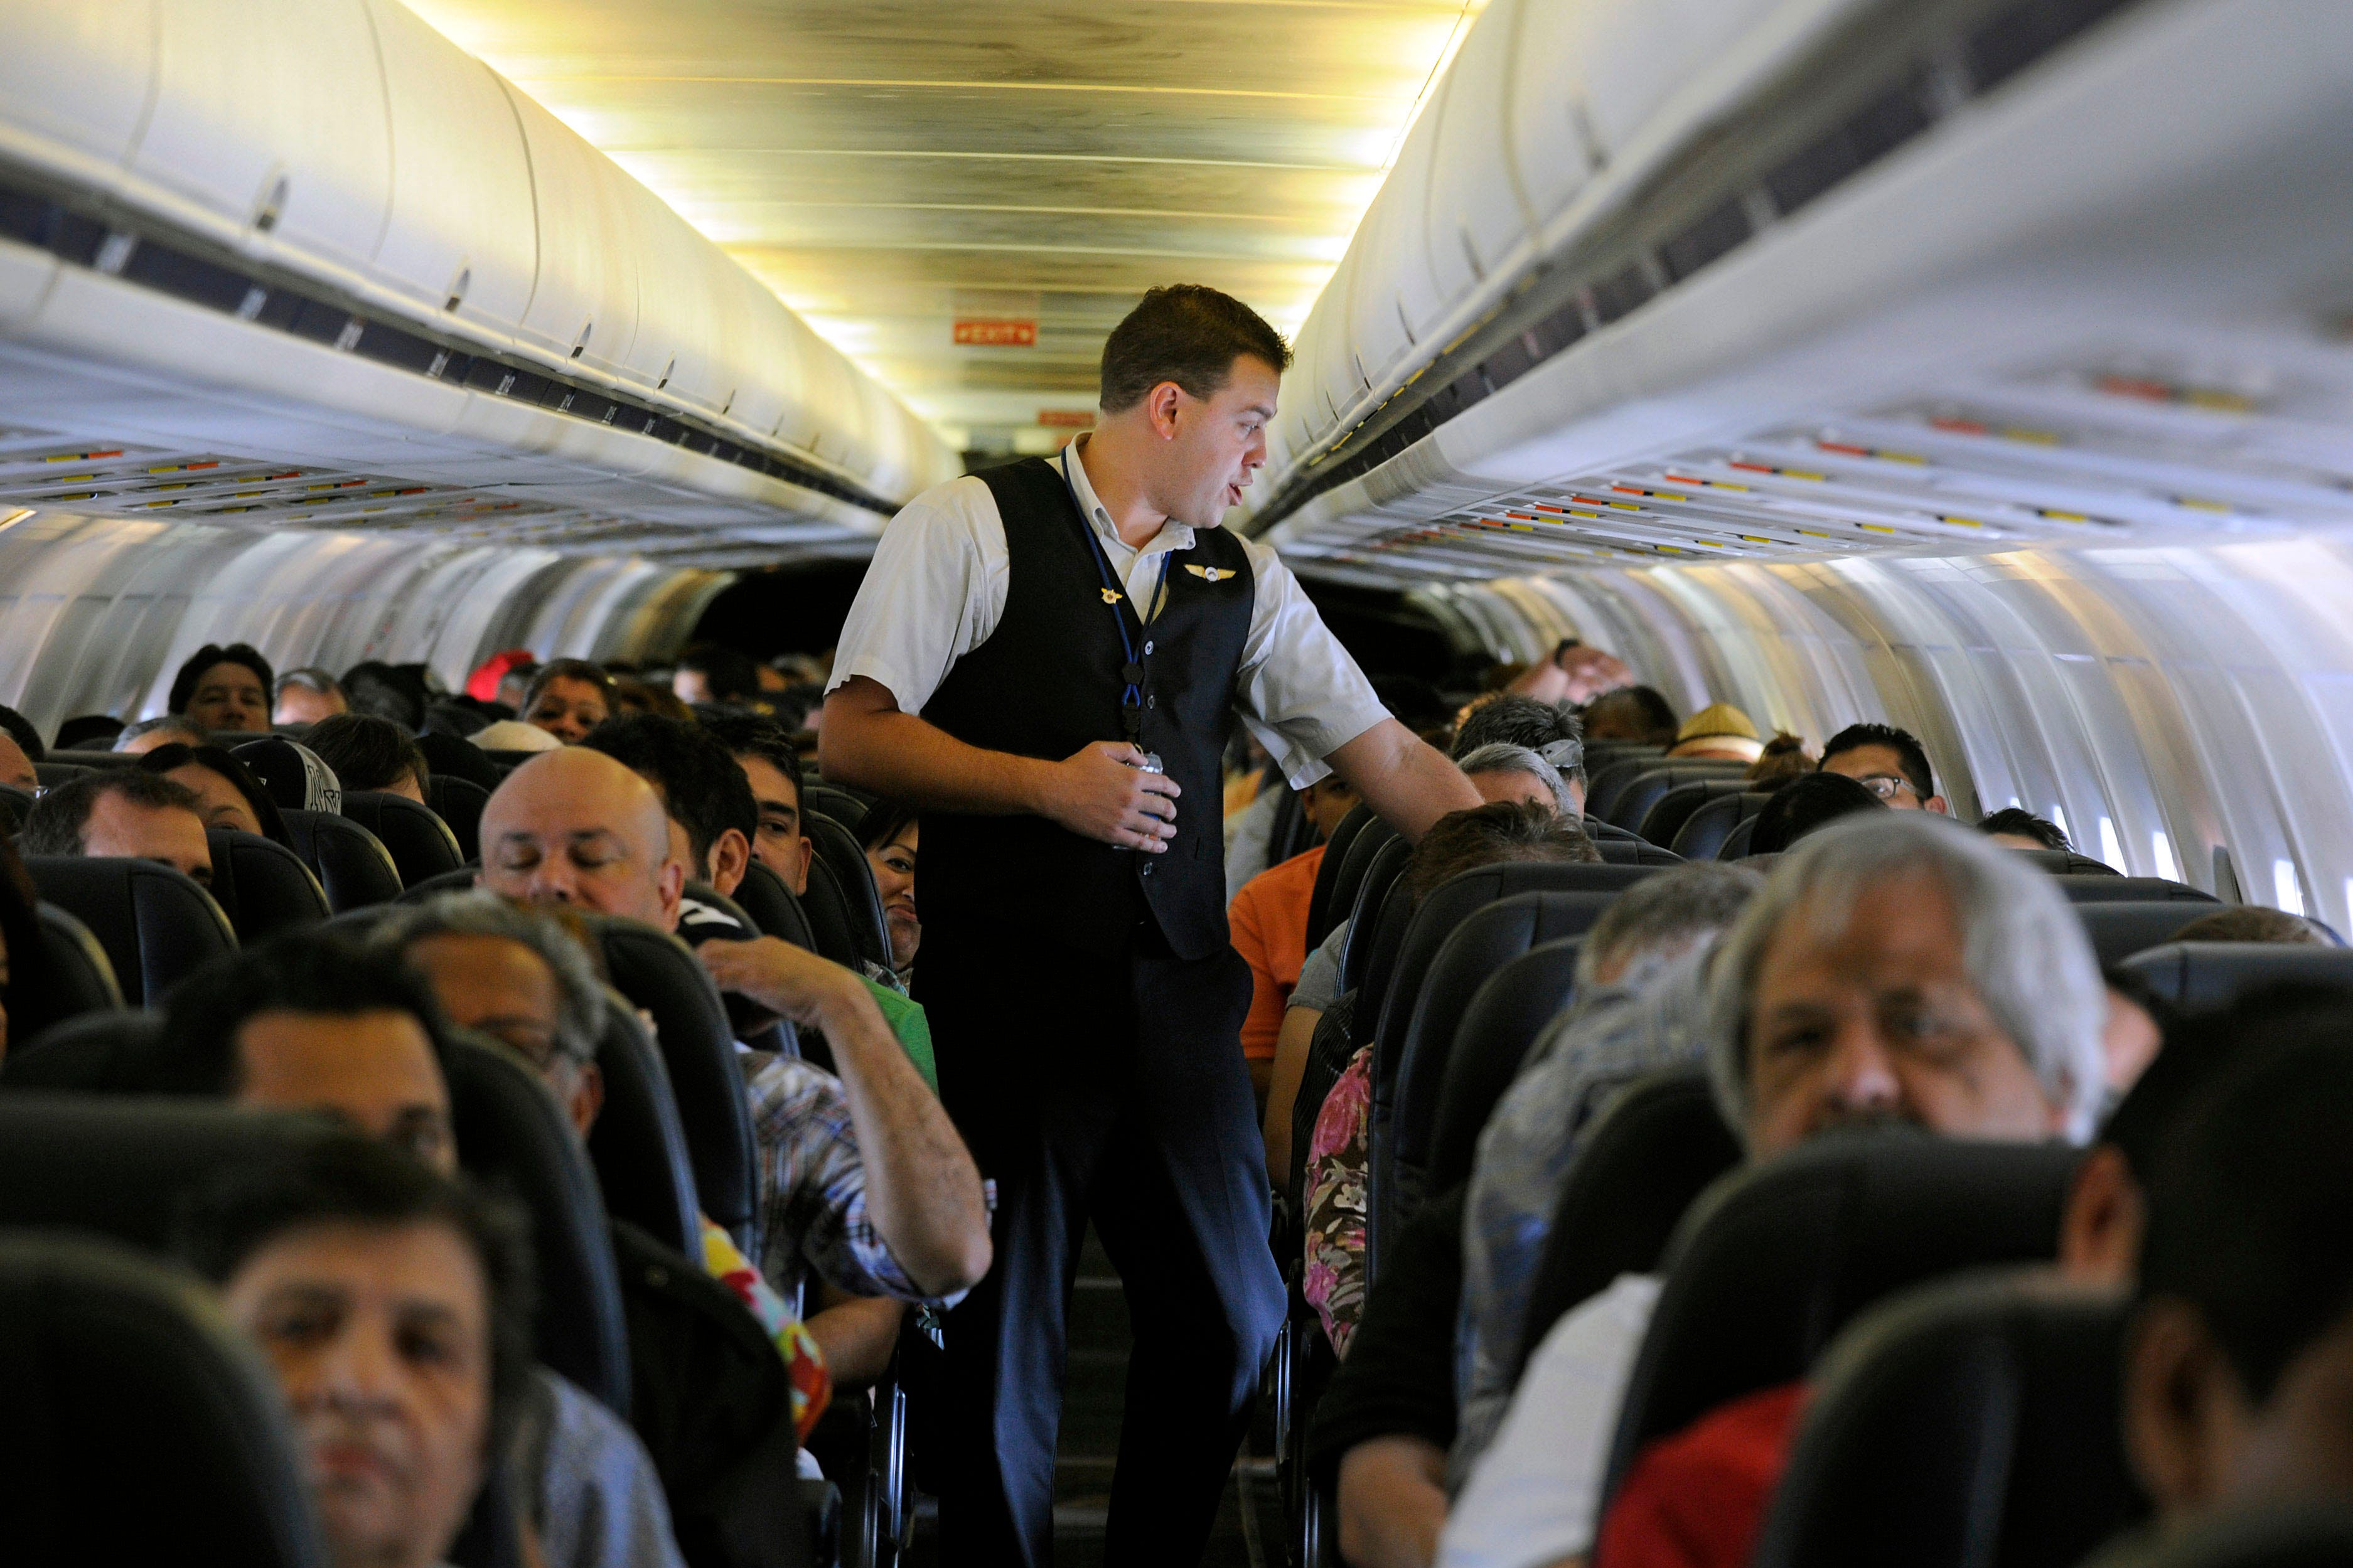 Allegiant Air flight attendant Chris Killian prepares his passengers for the Laredo, Texas, bound flight before it pushes back from the terminal at McCarran International Airport in Las Vegas, as seen in this May 9, 2013, file photo.